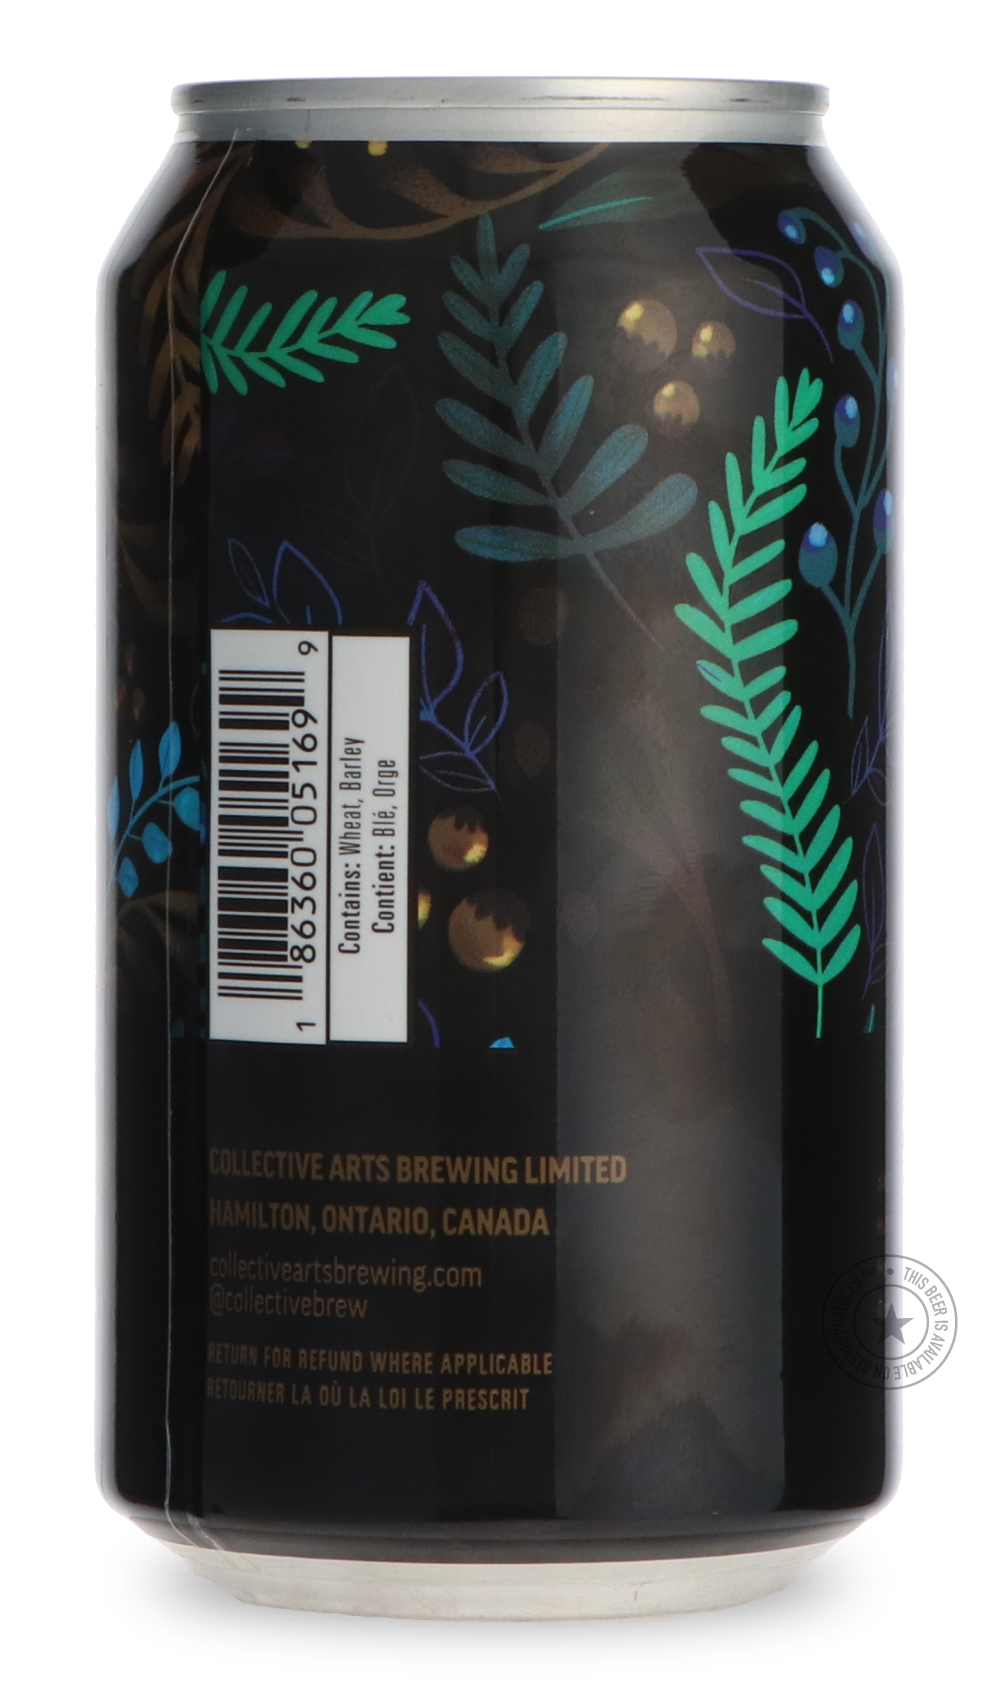 -Collective Arts- 2021 Bourbon Barrel-Aged Imperial Porter-Stout & Porter- Only @ Beer Republic - The best online beer store for American & Canadian craft beer - Buy beer online from the USA and Canada - Bier online kopen - Amerikaans bier kopen - Craft beer store - Craft beer kopen - Amerikanisch bier kaufen - Bier online kaufen - Acheter biere online - IPA - Stout - Porter - New England IPA - Hazy IPA - Imperial Stout - Barrel Aged - Barrel Aged Imperial Stout - Brown - Dark beer - Blond - Blonde - Pilsne